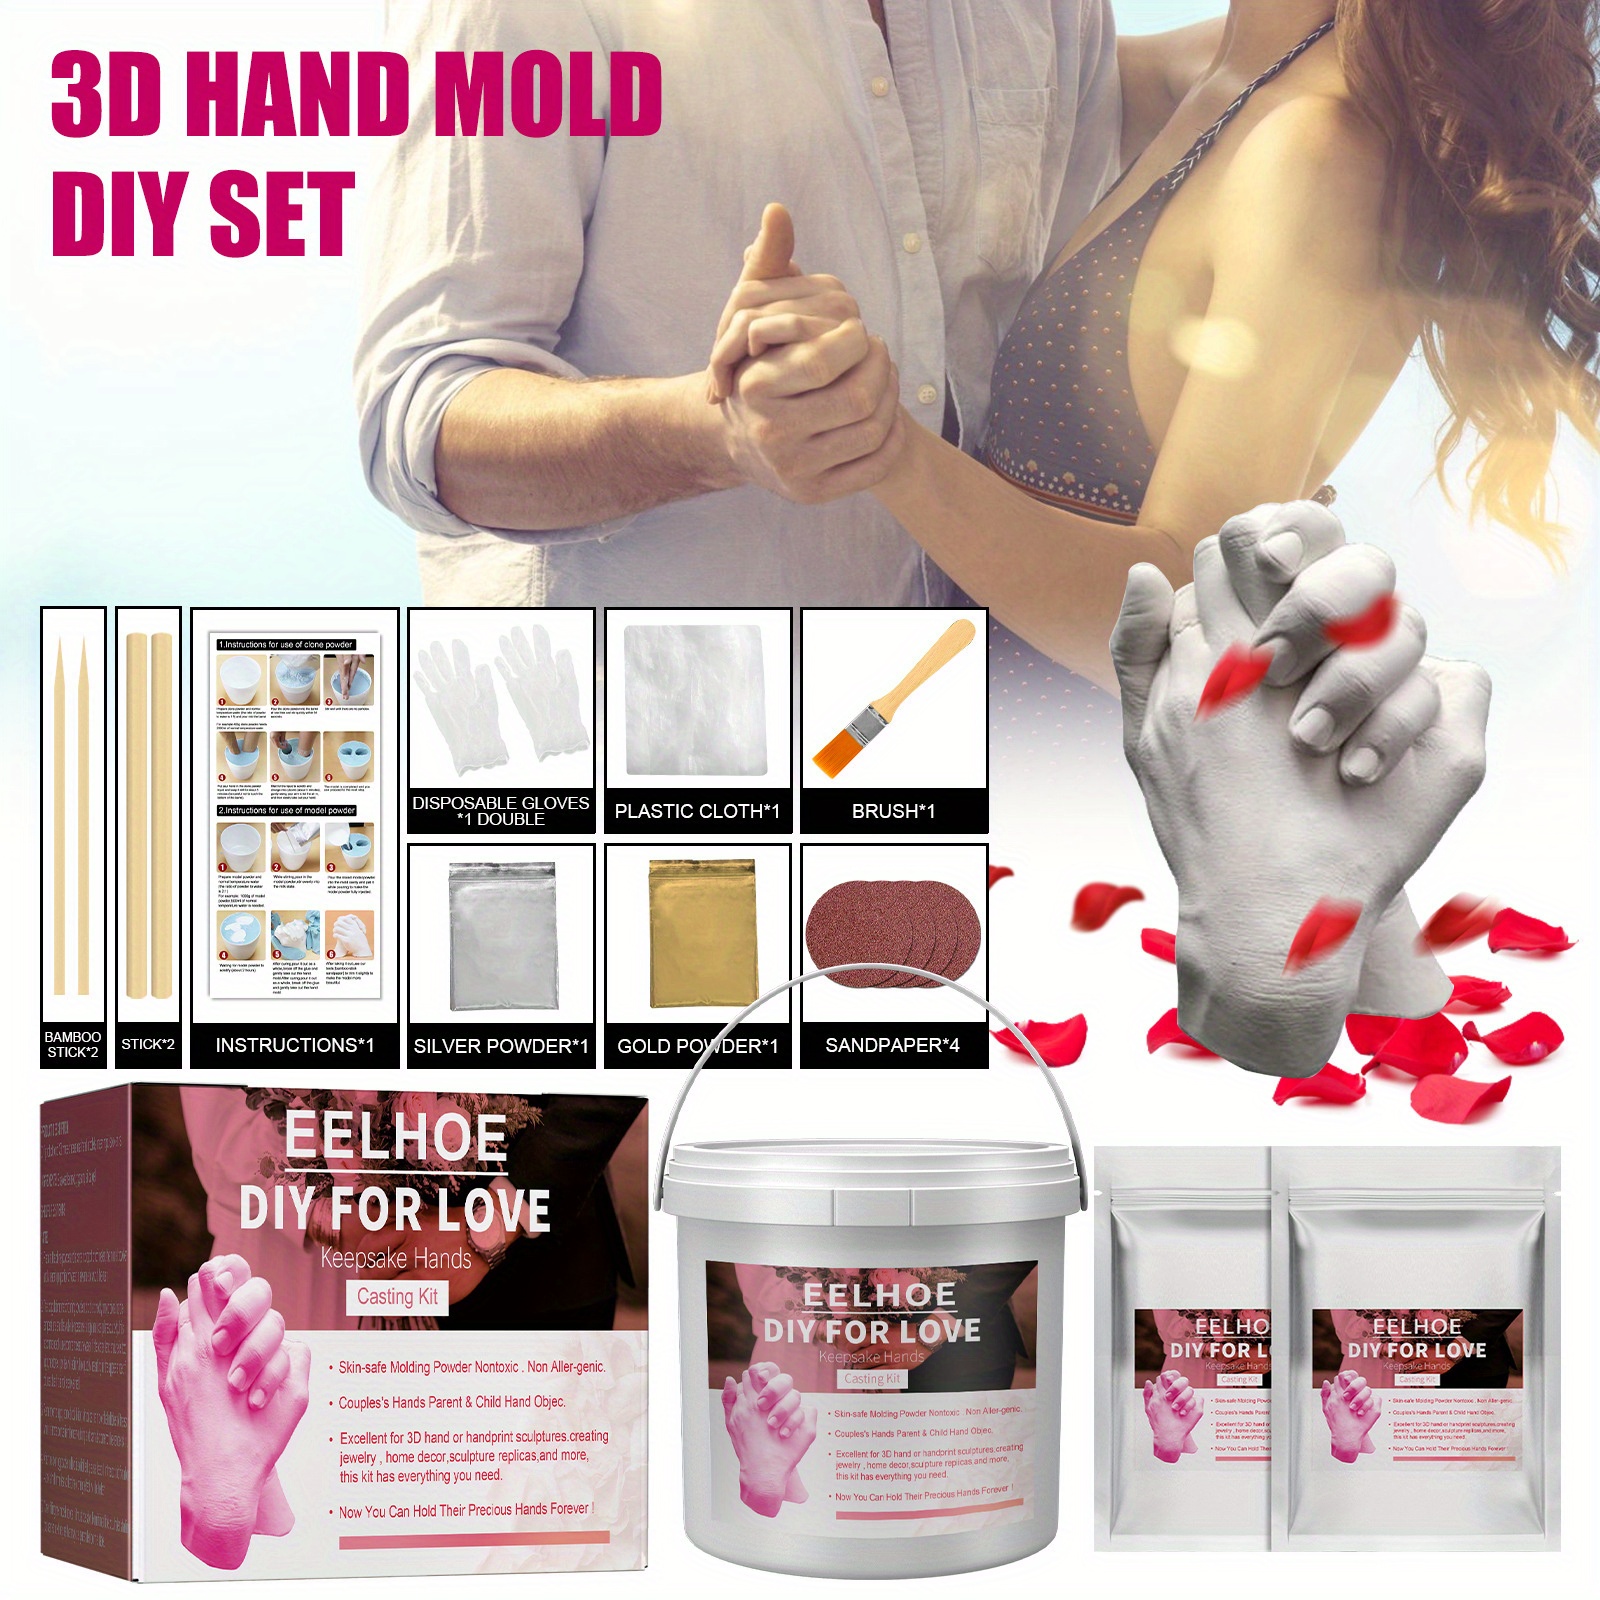 3D Hand Casting Kit Couples DIY Hand Molding Kit for Adults Keepsake Hand Mold Kit for Valentine's Day Wedding Anniversary Gifts, Adult Unisex, Size